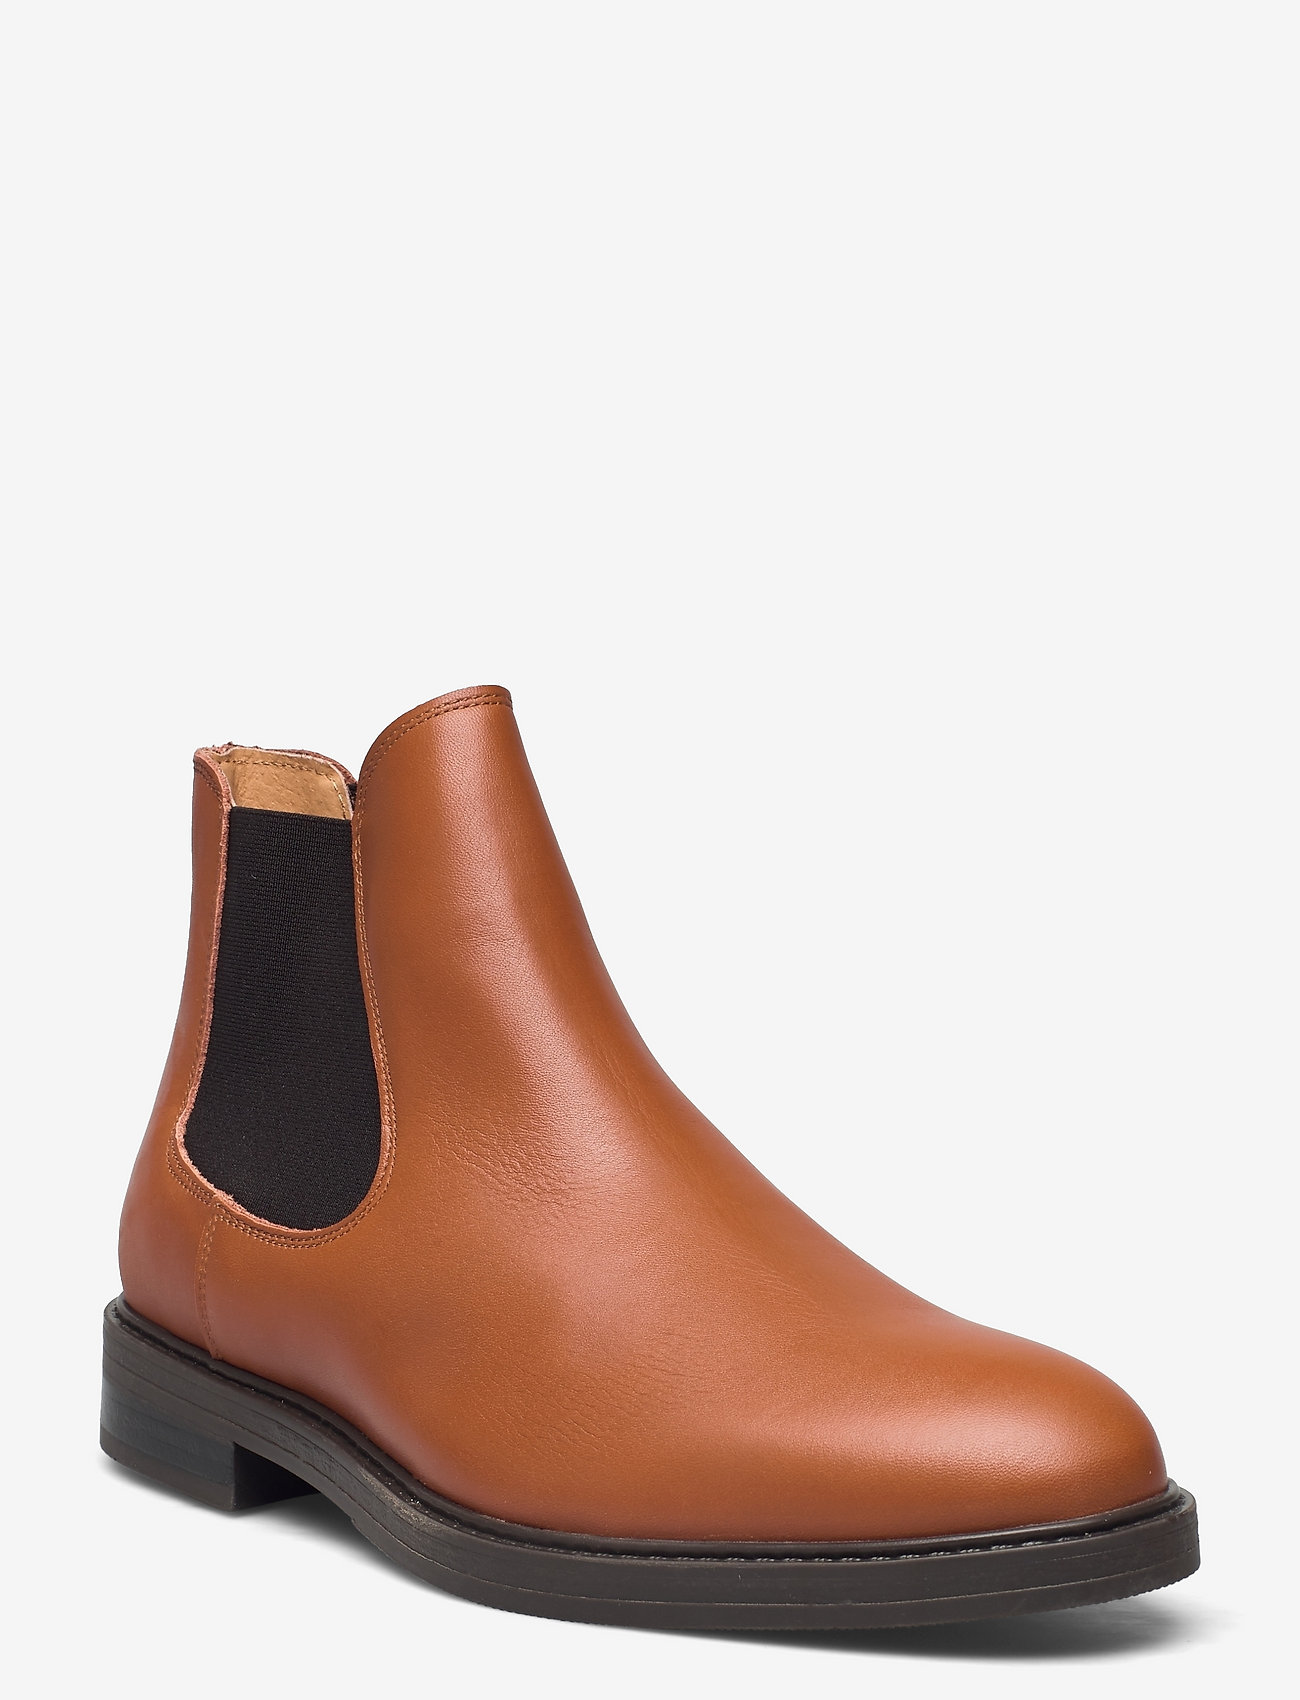 Selected Homme - SLHBLAKE LEATHER CHELSEA BOOT NOOS - gimtadienio dovanos - cognac - 0